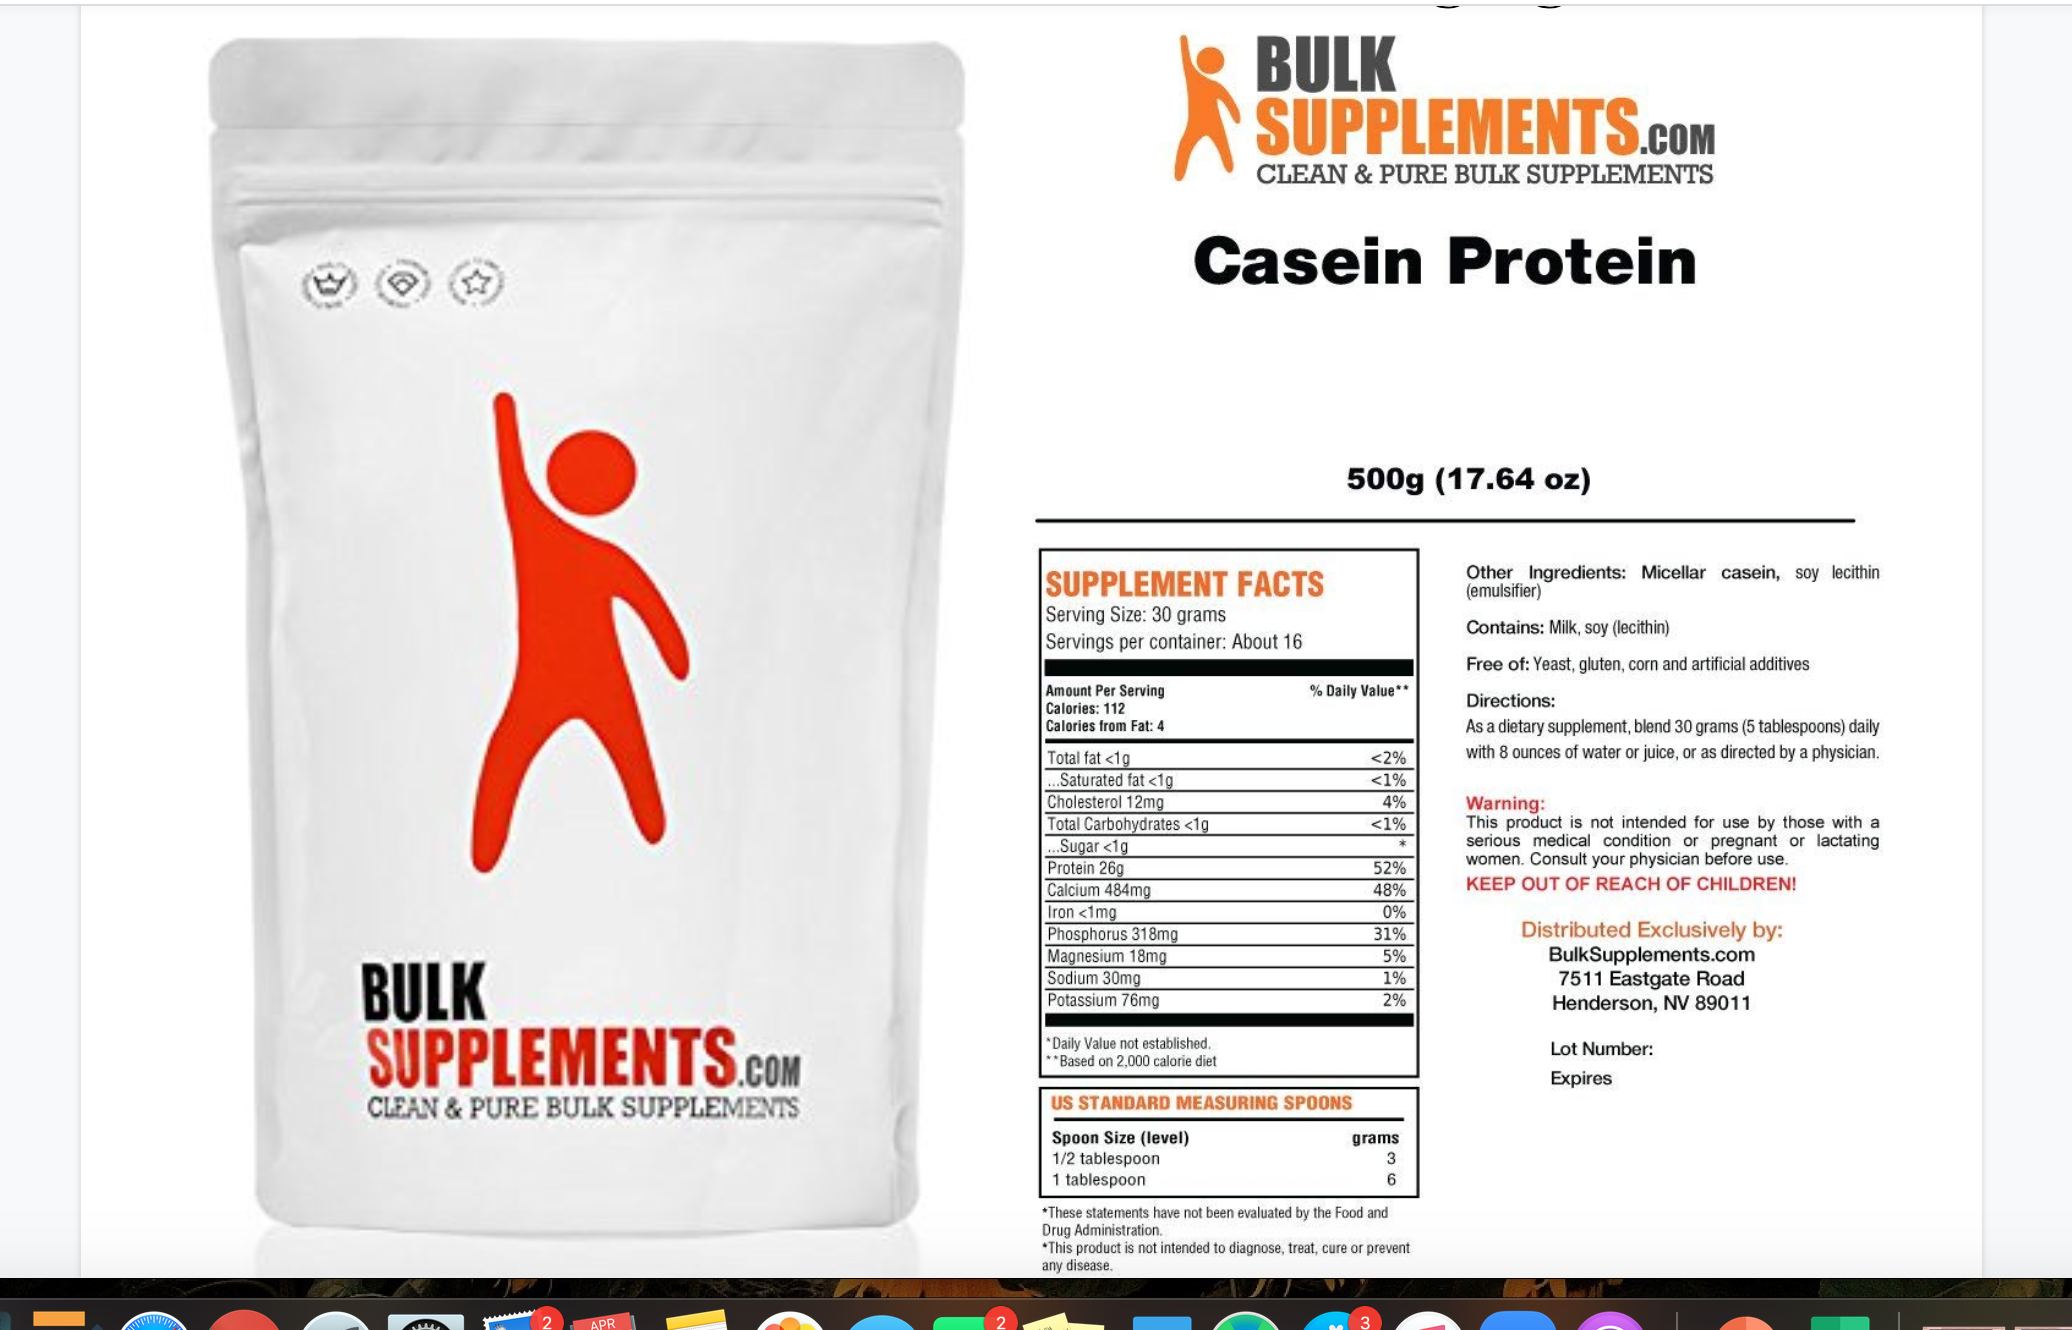 BULK
SUPPLEMENTS.COM
CLEAN & PURE BULK SUPPLEMENTS
Casein Protein
500g (17.64 oz)
Other Ingredients: Micellar casein, soy lecithin
(emulsifier)
SUPPLEMENT FACTS
Serving Size: 30 grams
Servings per container: About 16
Contains: Milk, soy (lecithin)
Free of: Yeast, gluten, corn and artificial additives
Amount Per Serving
Calories: 112
Calories from Fat: 4
% Daily Value**
Directions:
As a dietary supplement, blend 30 grams (5 tablespoons) daily
with 8 ounces of water or juice, or as directed by a physician.
Total fat <1g
Saturated fat <1g
Cholesterol 12mg
Total Carbohydrates <1g
.Sugar <1g
Protein 26g
Calcium 484mg
Iron <1mg
Phosphorus 318mg
Magnesium 18mg
Sodium 30mg
Potassium 76mg
<2%
<1%
4%
Warning:
This product is not intended for use by those with a
serious medical condition or pregnant or lactating
women. Consult your physician before use.
<1%
52%
48%
KEEP OUT OF REACH OF CHILDREN!
0%
Distributed Exclusively by:
BulkSupplements.com
7511 Eastgate Road
Henderson, NV 89011
31%
5%
BULK
SUPPLEMENTS.coM
1%
*Daily Value not established.
**Based on 2,000 calorie diet
Lot Number:
Expires
CLEAN & PURE BULK SUPPLEMENTS
US STANDARD MEASURING SPOONS
Spoon Size (level)
1/2 tablespoon
1 tablespoon
grams
3
*These statements have not been evaluated by the Food and
Drug Administration.
*This product is not intended to diagnose, treat, cure or prevent
any disease.
APR
